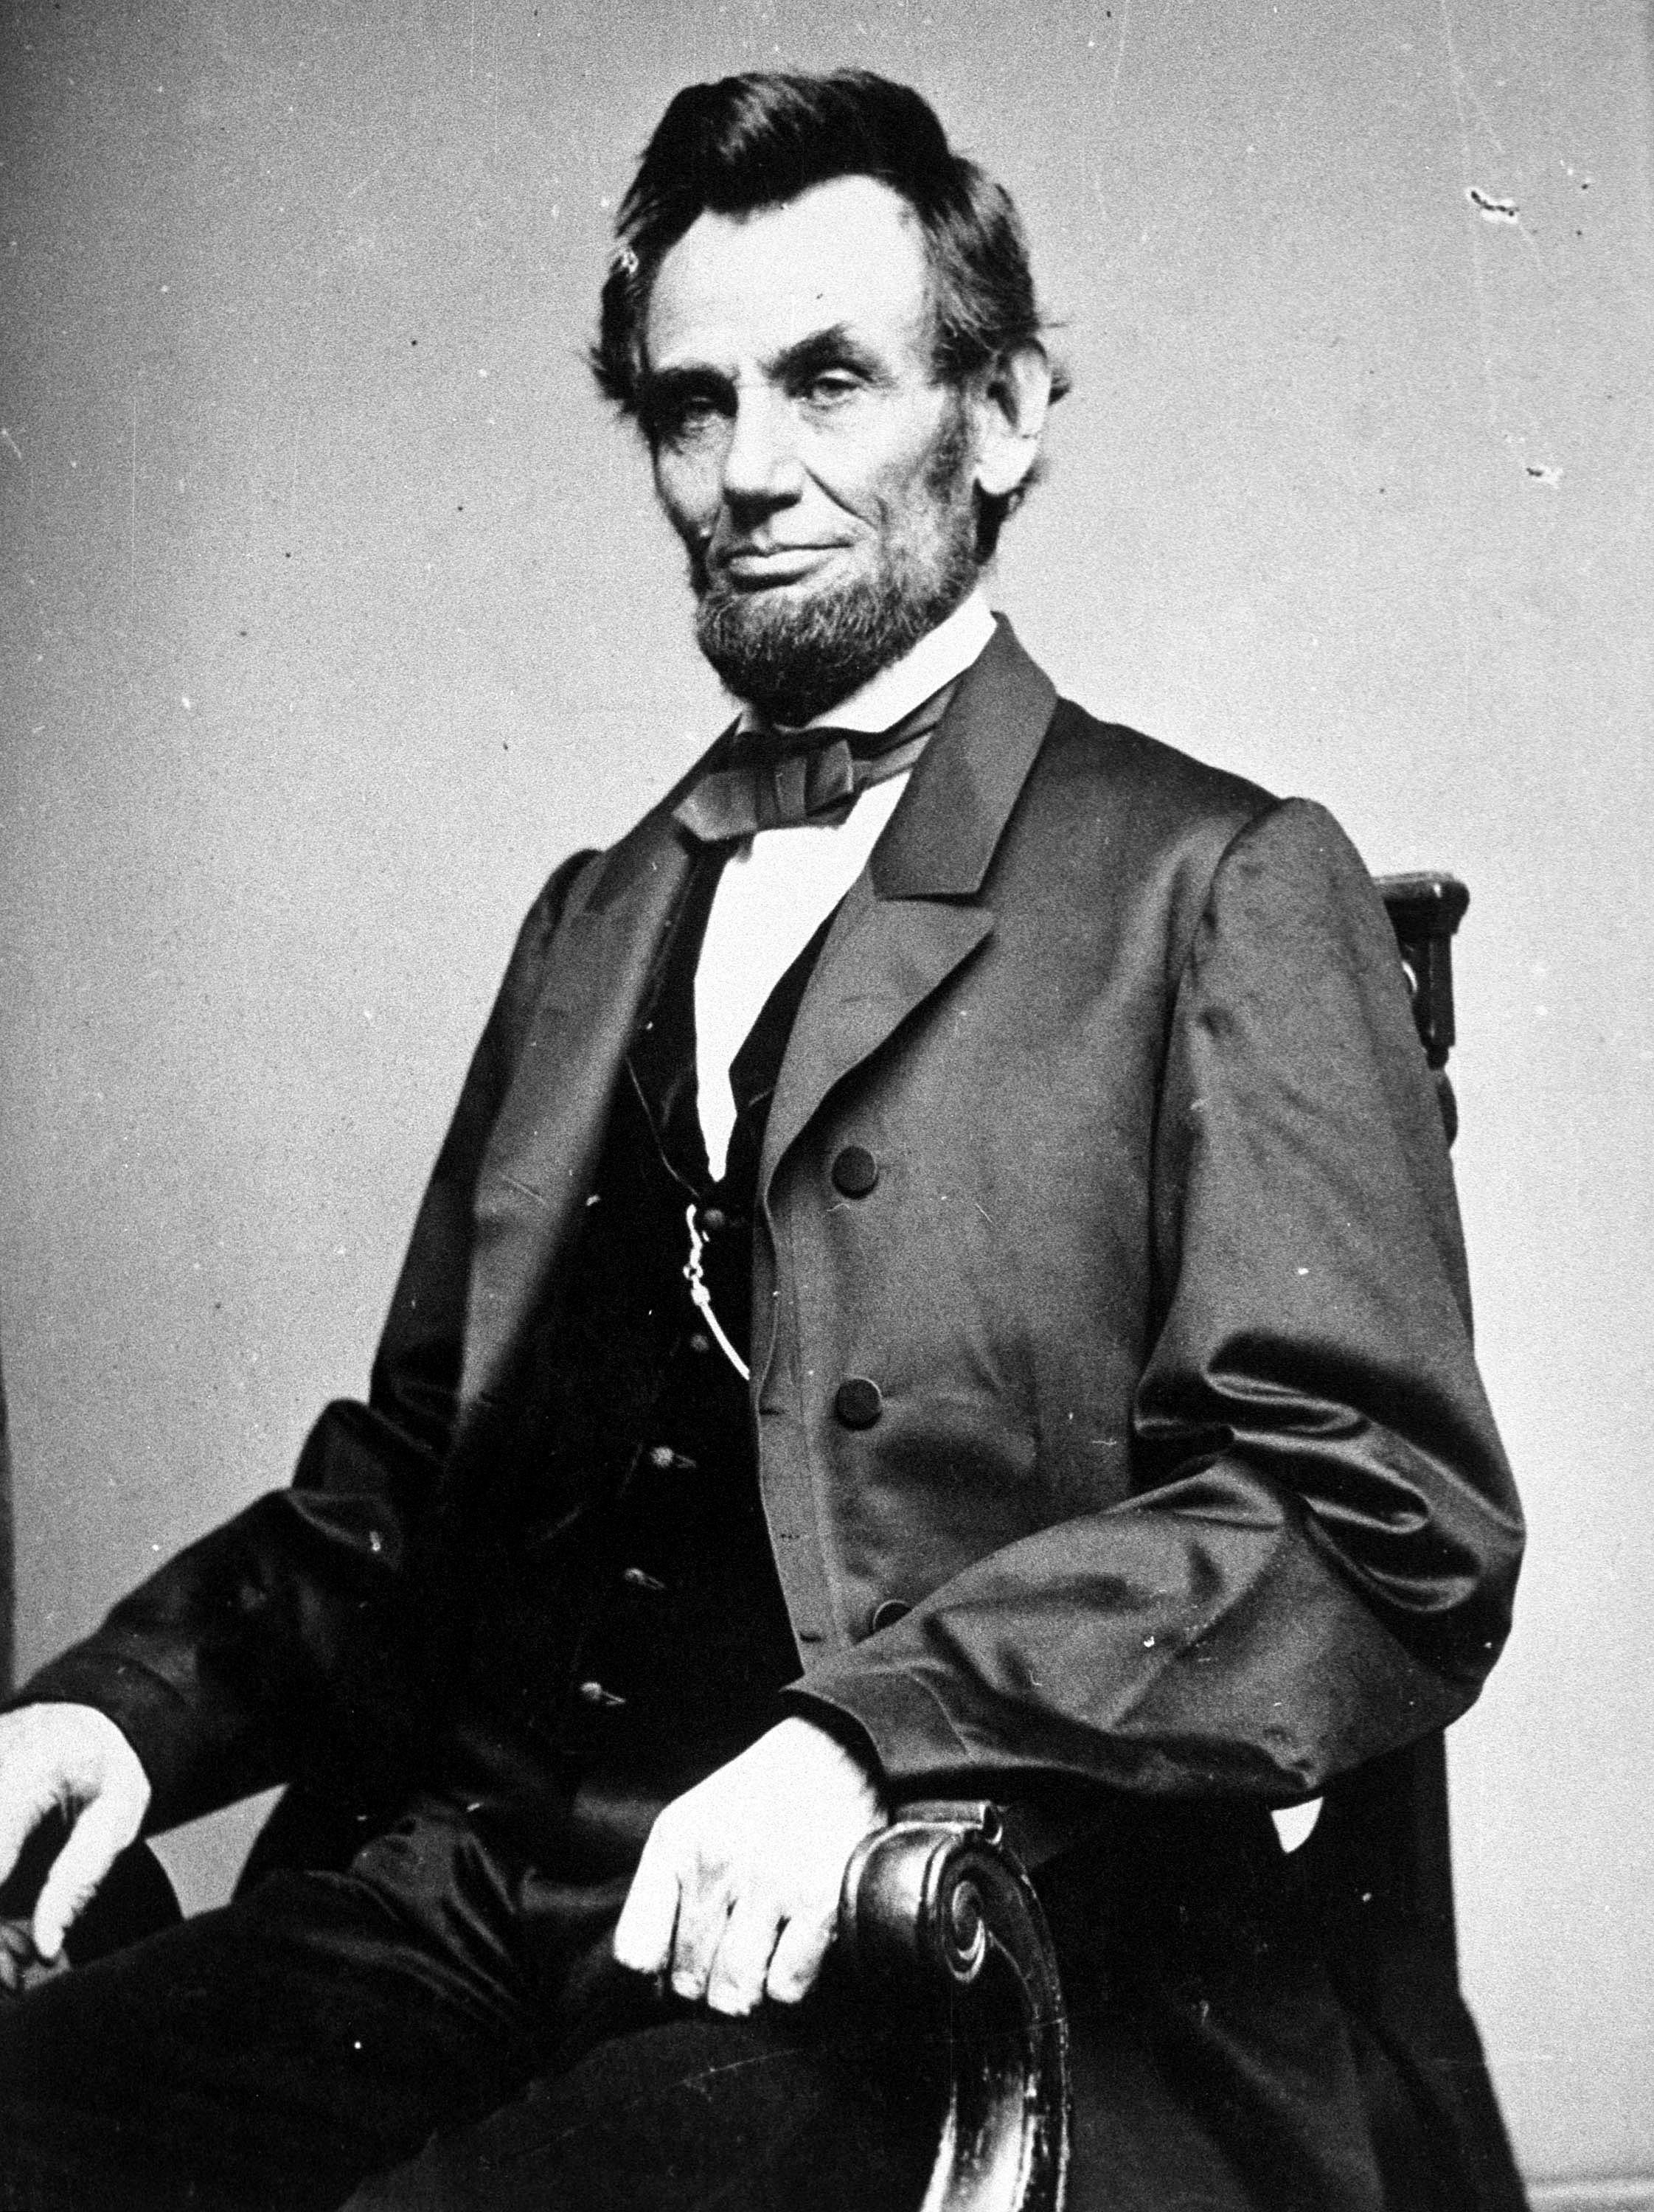 Portrait of Abraham Lincoln seated in a chair with a bow tie and formal coat